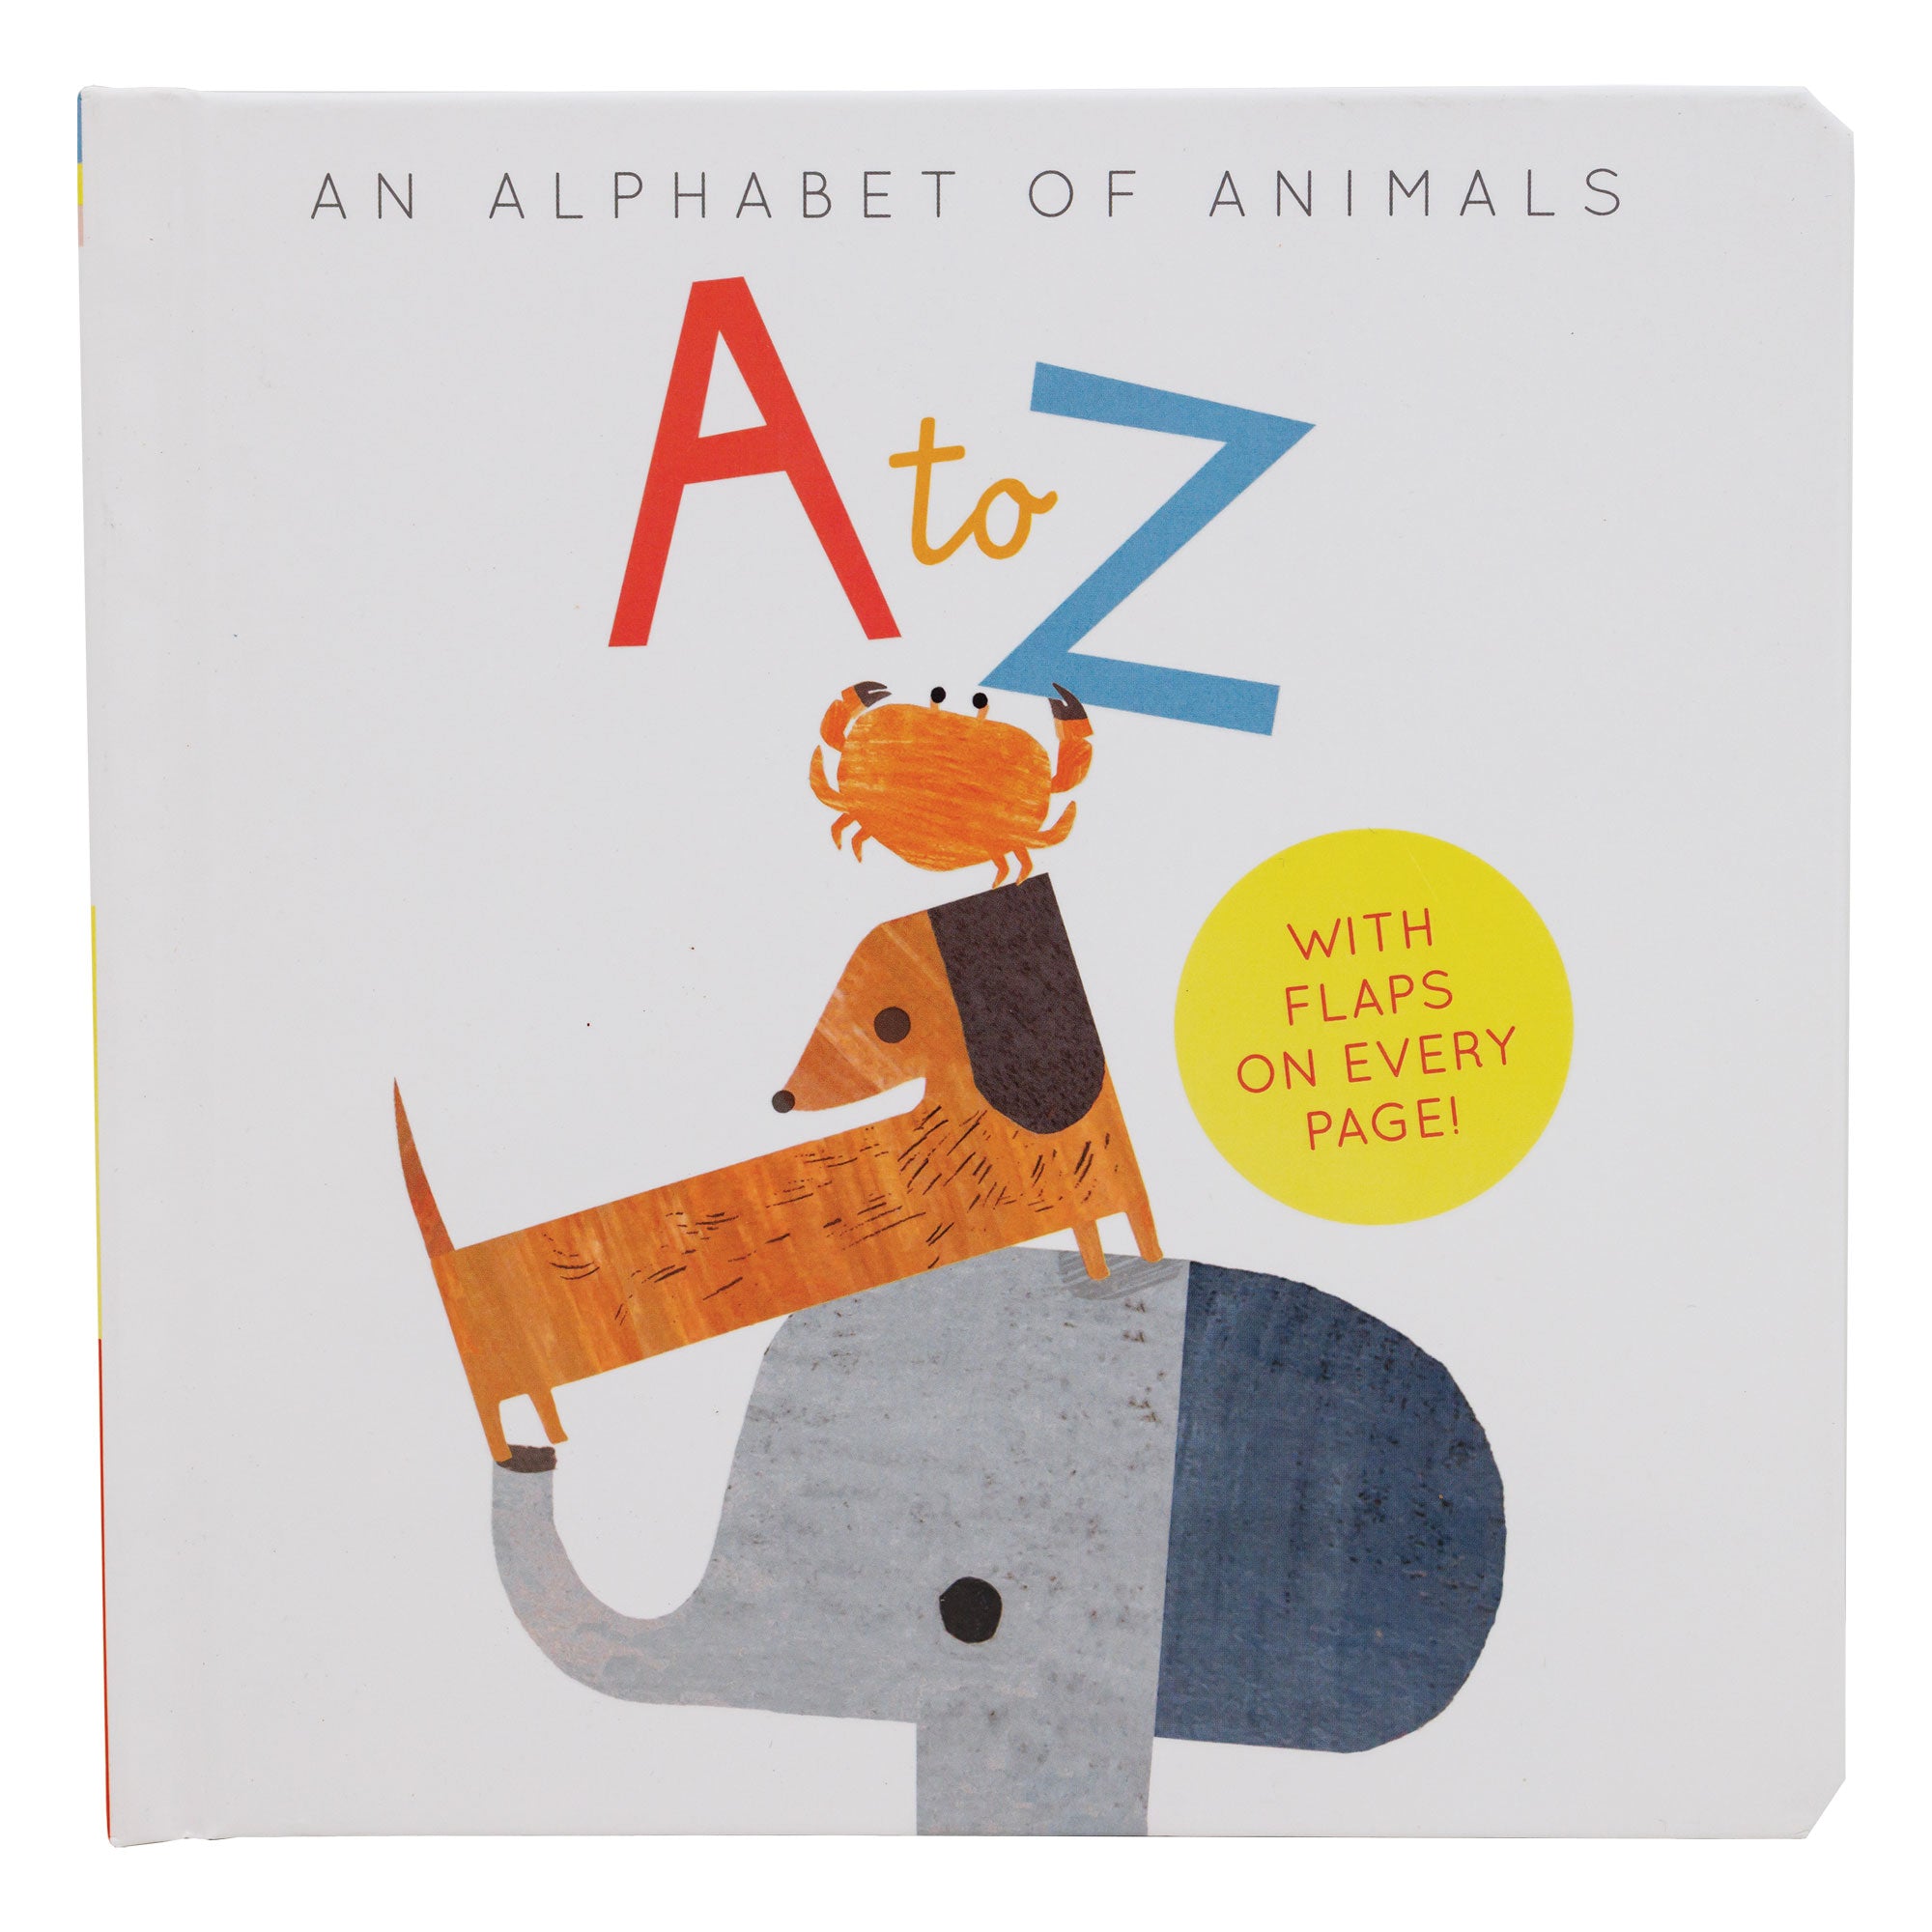 A to Z book cover with a white cover and an illustration stacked animals. There is an elephant on bottom with a dachshund standing on the elephants head and a crab standing on the dachshund's head. The crab is reaching up to the title. The title "A to Z" is red, orange and blue. There is text on the book reading "an alphabet of animal" and "with flaps on every page." 